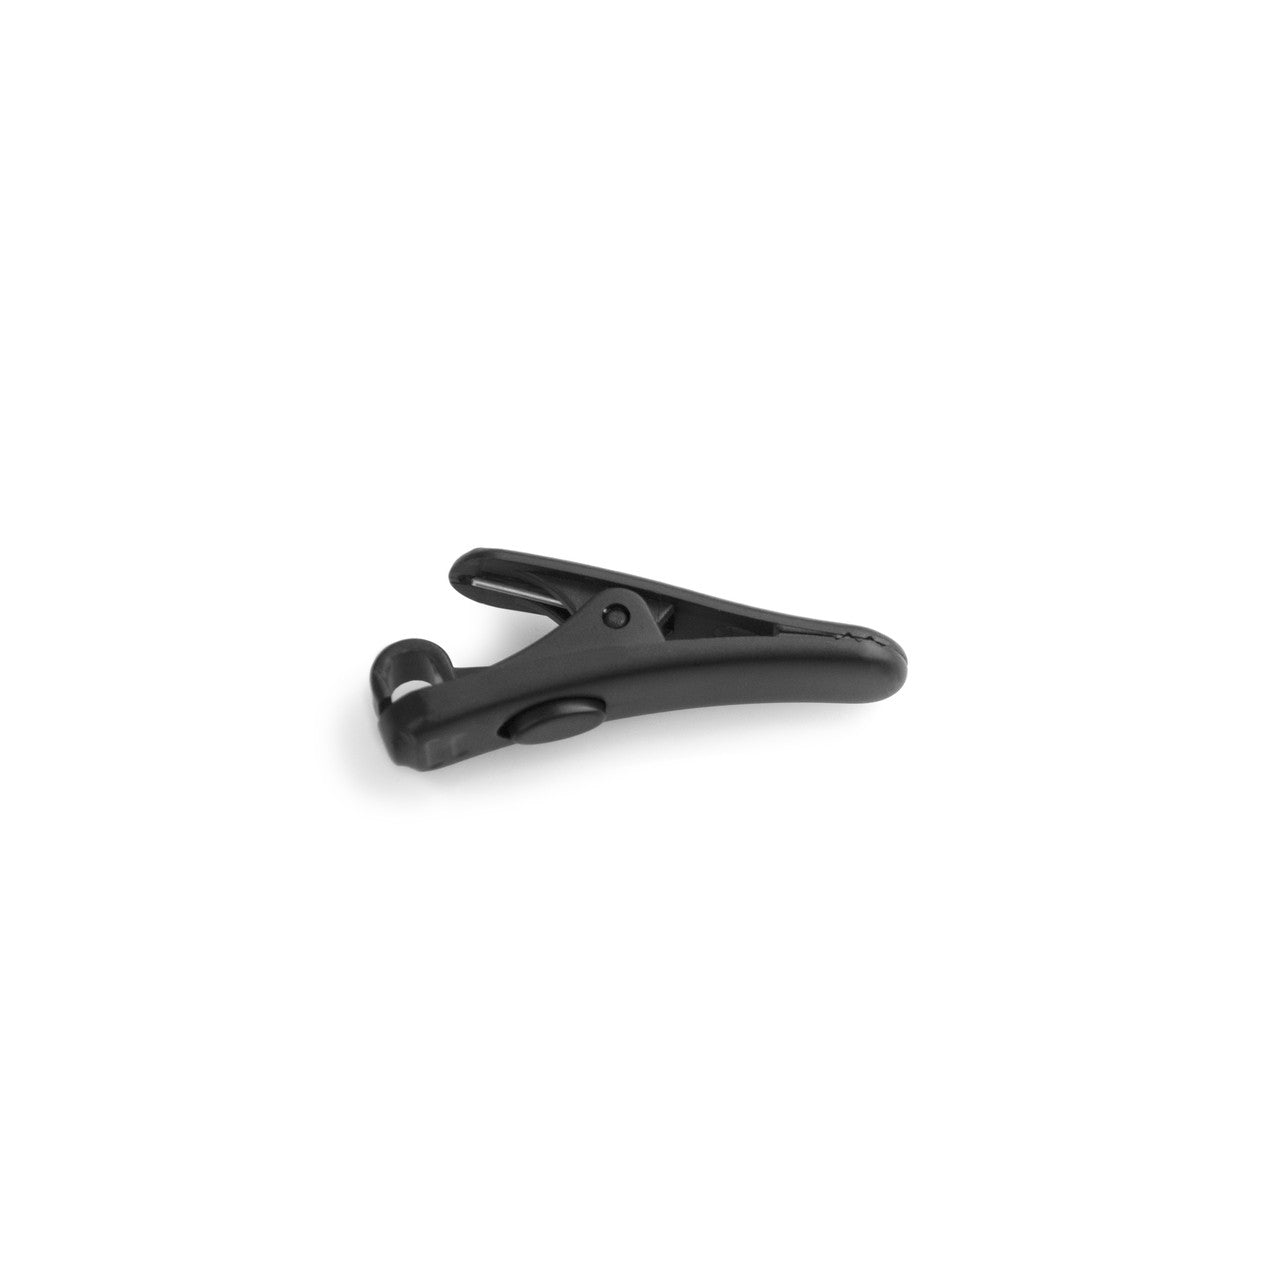 Image of Heavy-Duty Shirt Clip for Earphones and In-Ear Monitors.